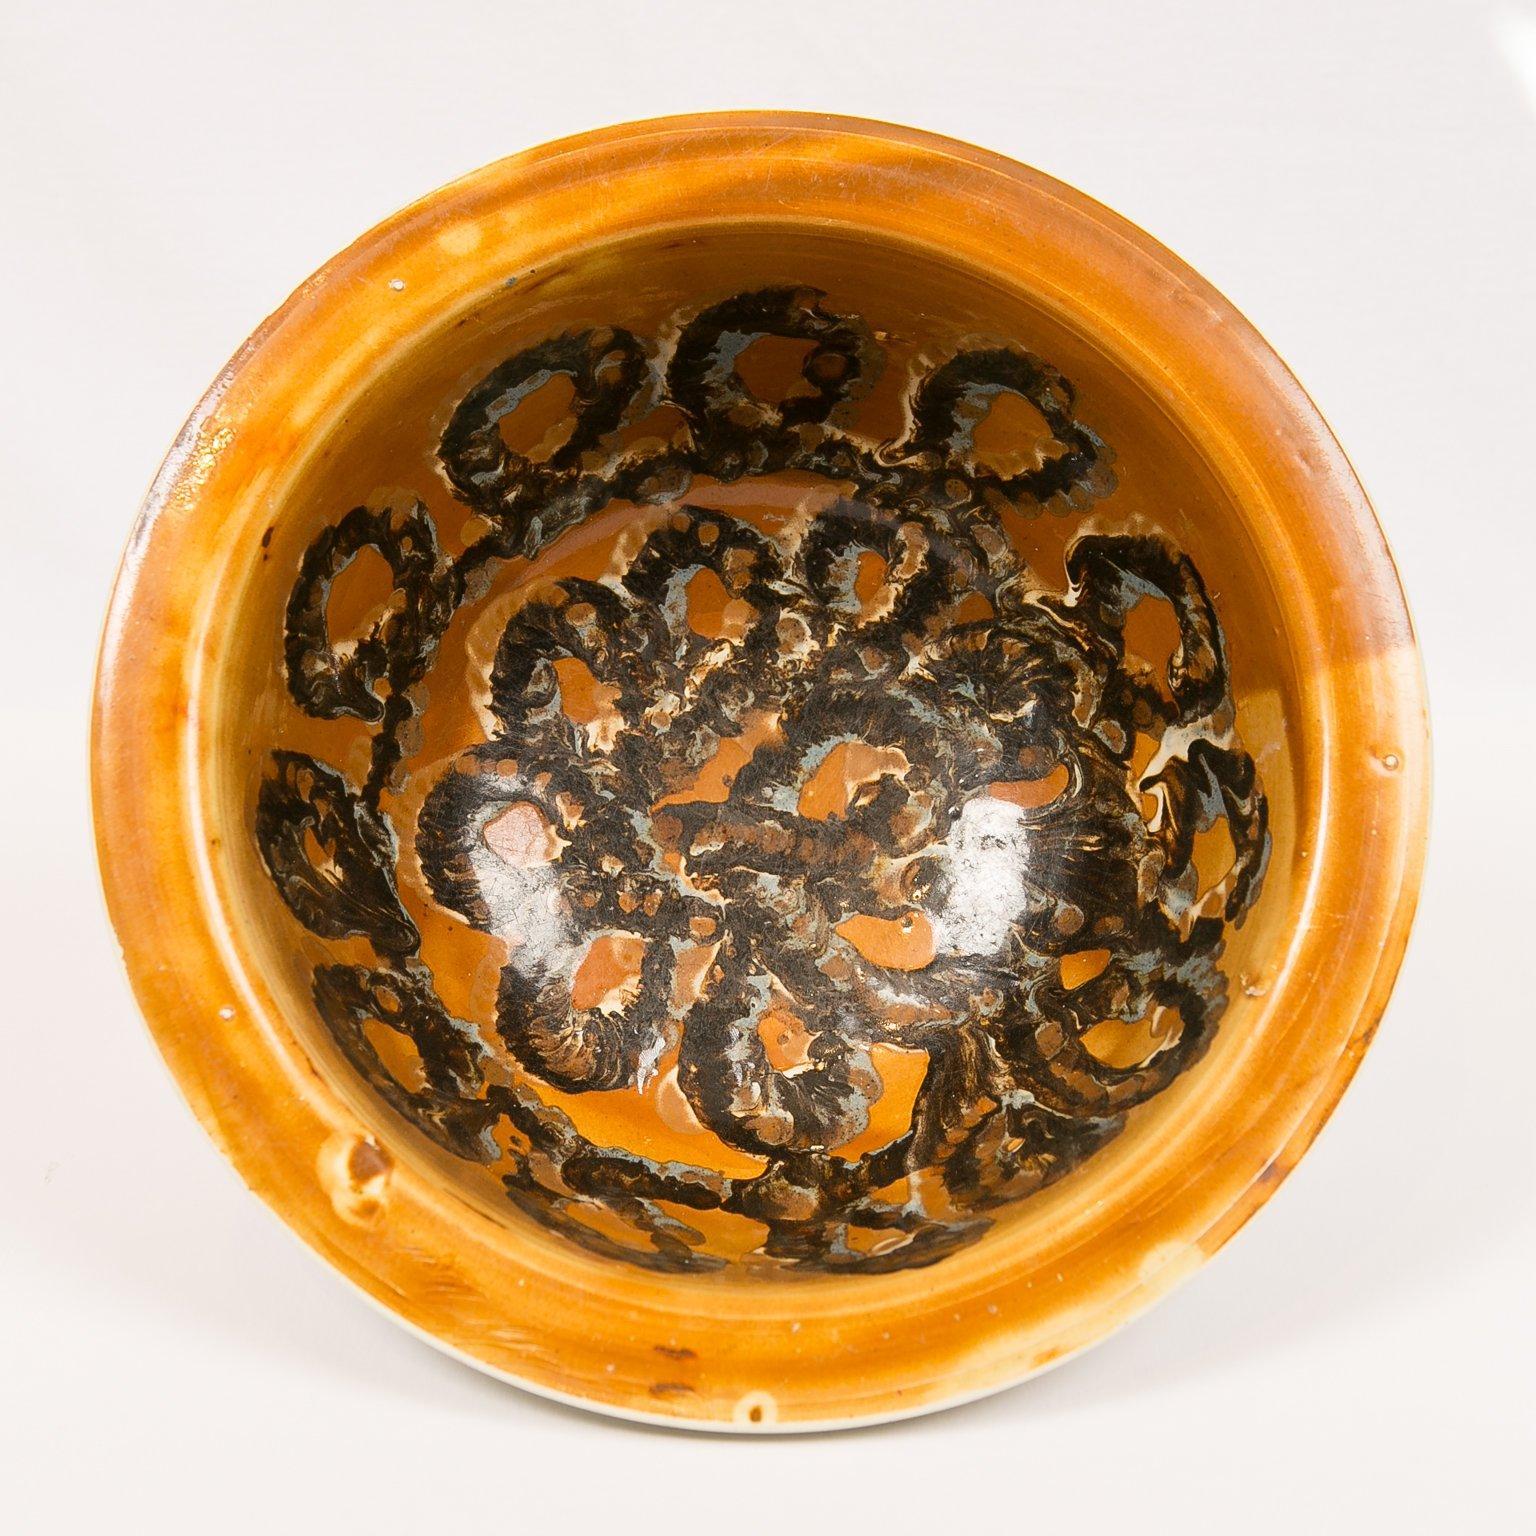 An exceptionally large and rare mid-19th century English mocha ware bowl with an everted lip. Decorated on the inside with a remarkable three color cable of dark brown, light brown and light blue which covers most of the well. The slip decoration